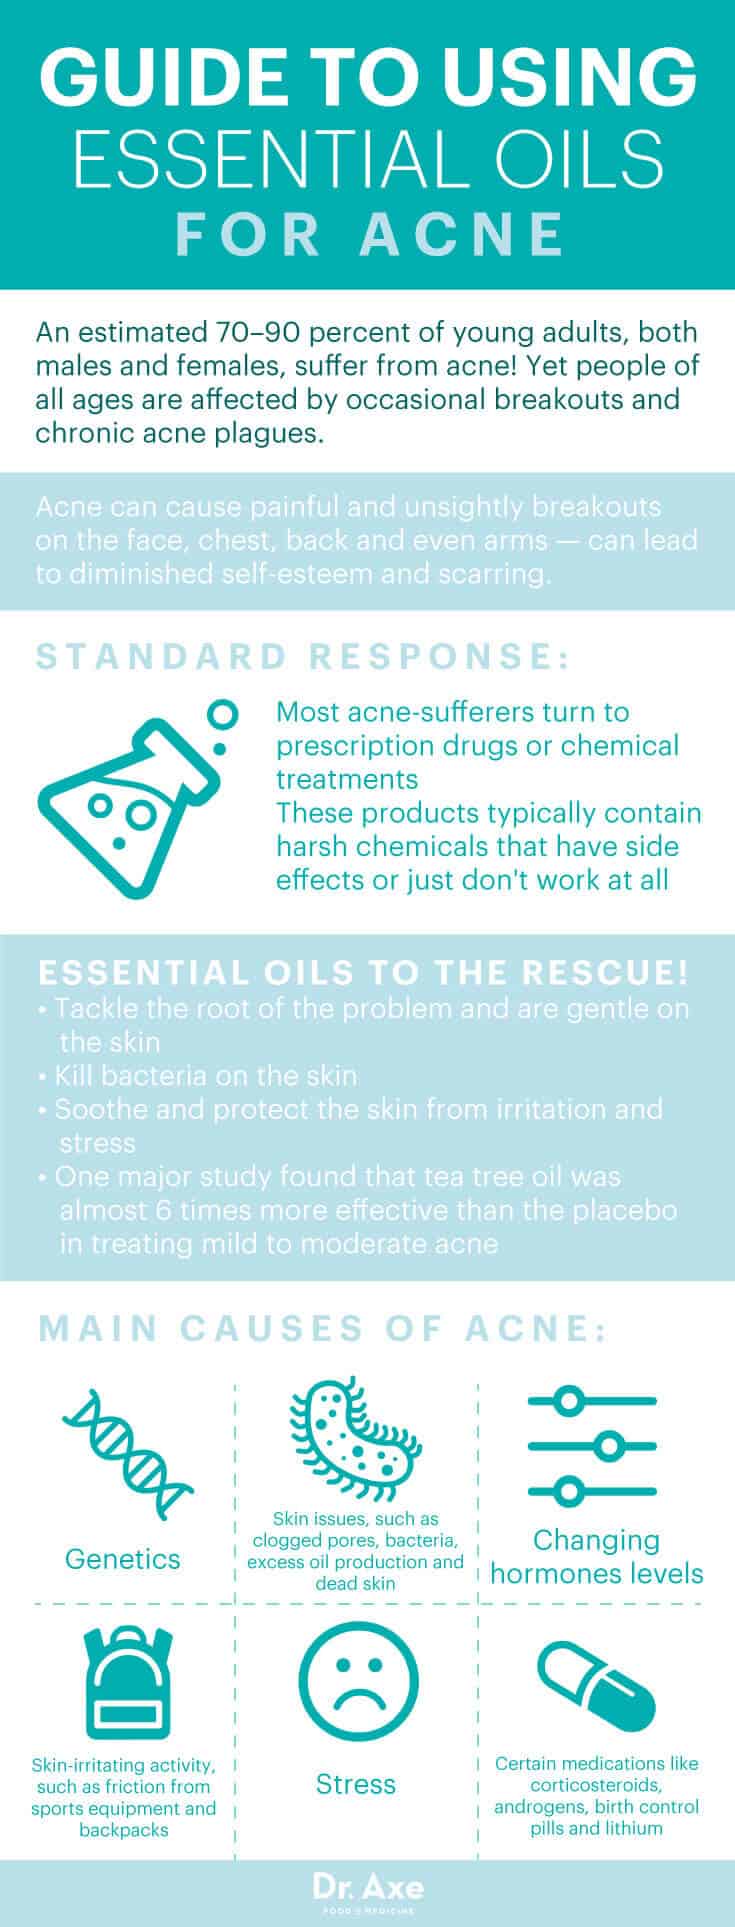 Guide to using essential oils for acne - Dr. Axe